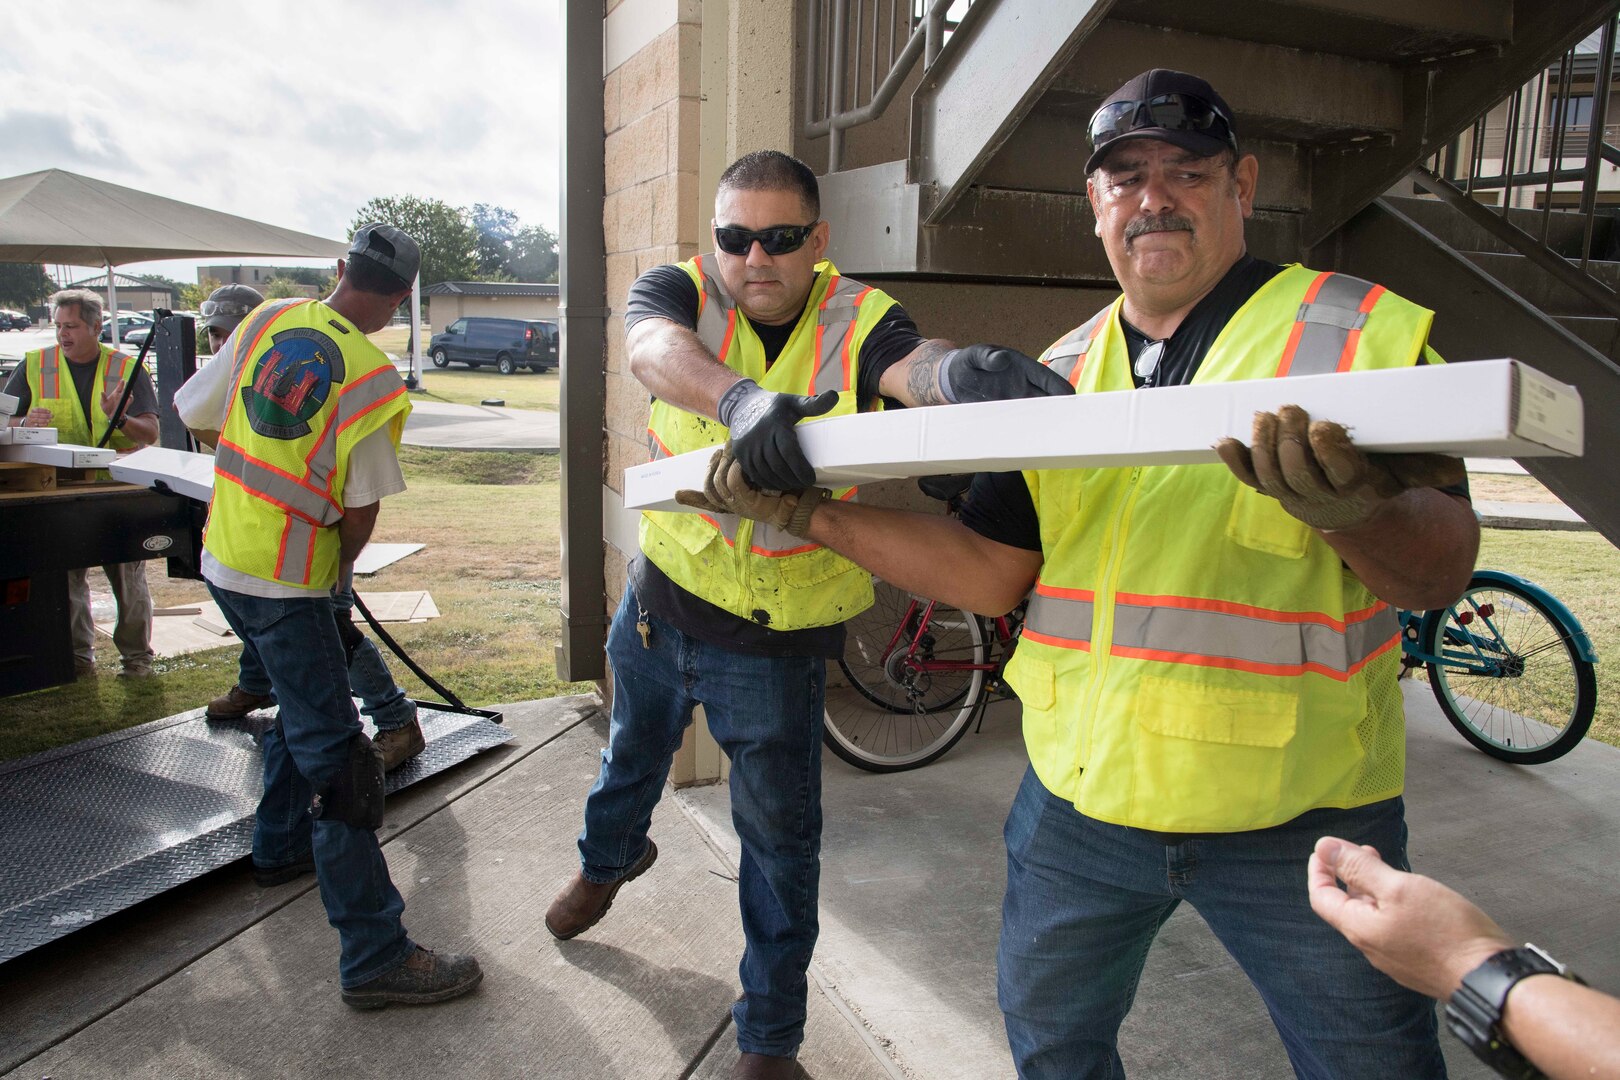 Professionals from the 502nd Air Base Wing Civil Engineer Group work to remediate dorms with mold July 29 at Joint Base San Antonio–Lackland. The mold remediation is taking place after Airmen at JBSA-Lackland voiced their concerns.